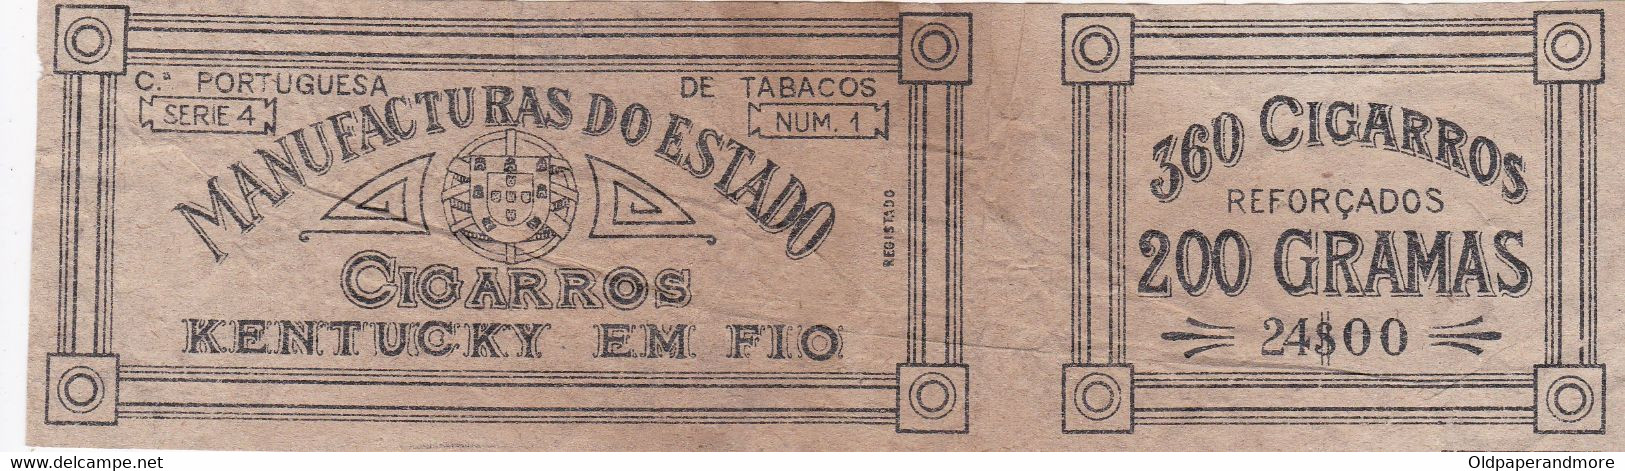 My Box 2 - PORTUGAL - LABEL - CIGARROS KENTUCKY - OLD CIGAR LABEL - TOBACCO LABEL - Etiquettes